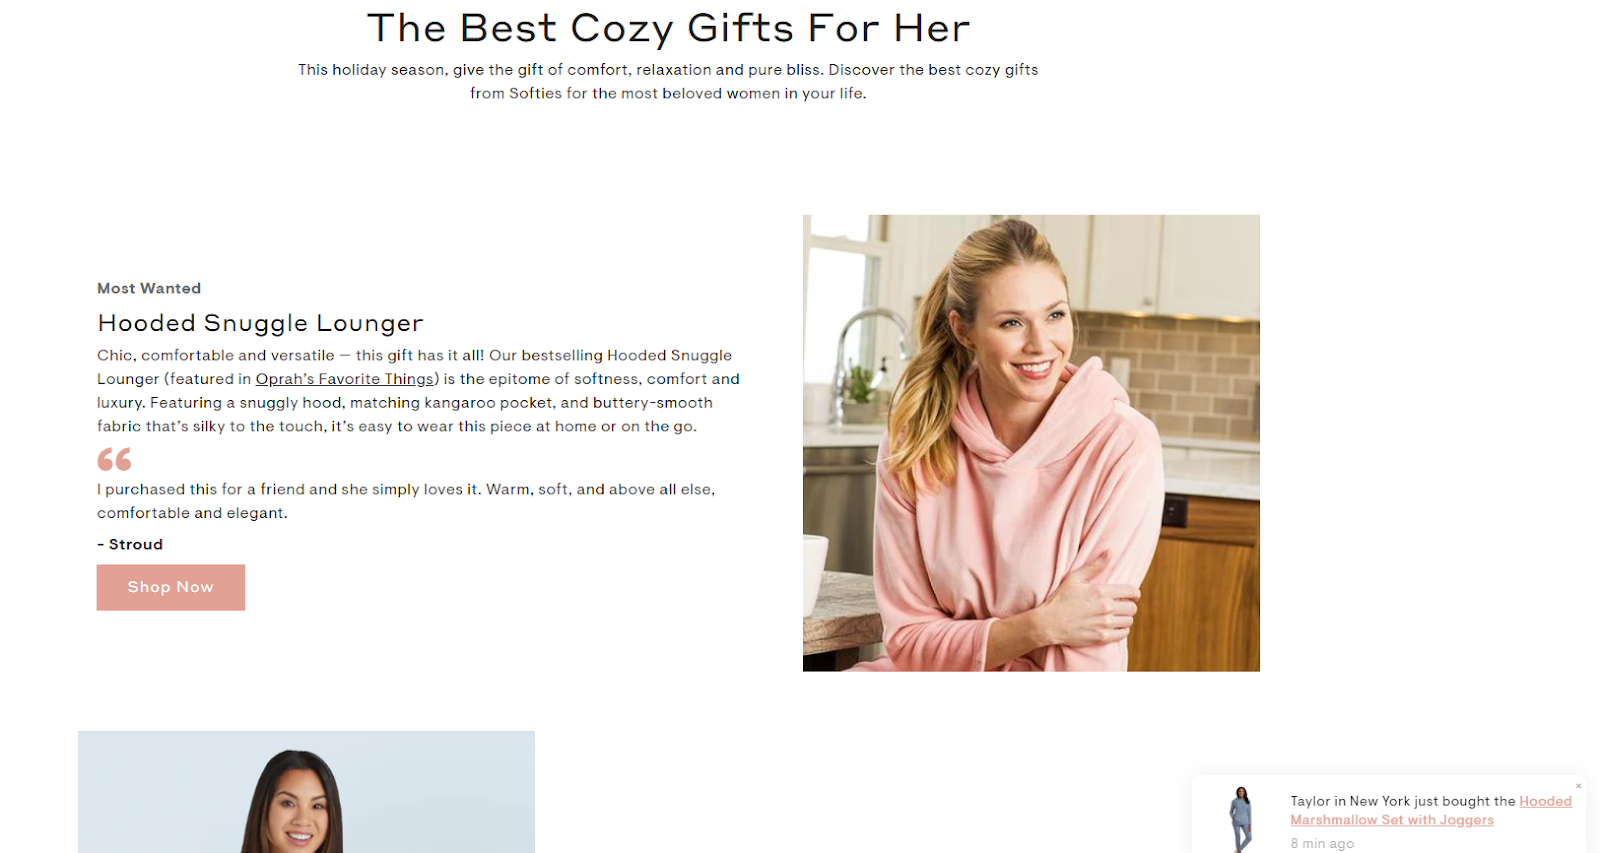 gift guide example for smaller ecommerce businesses